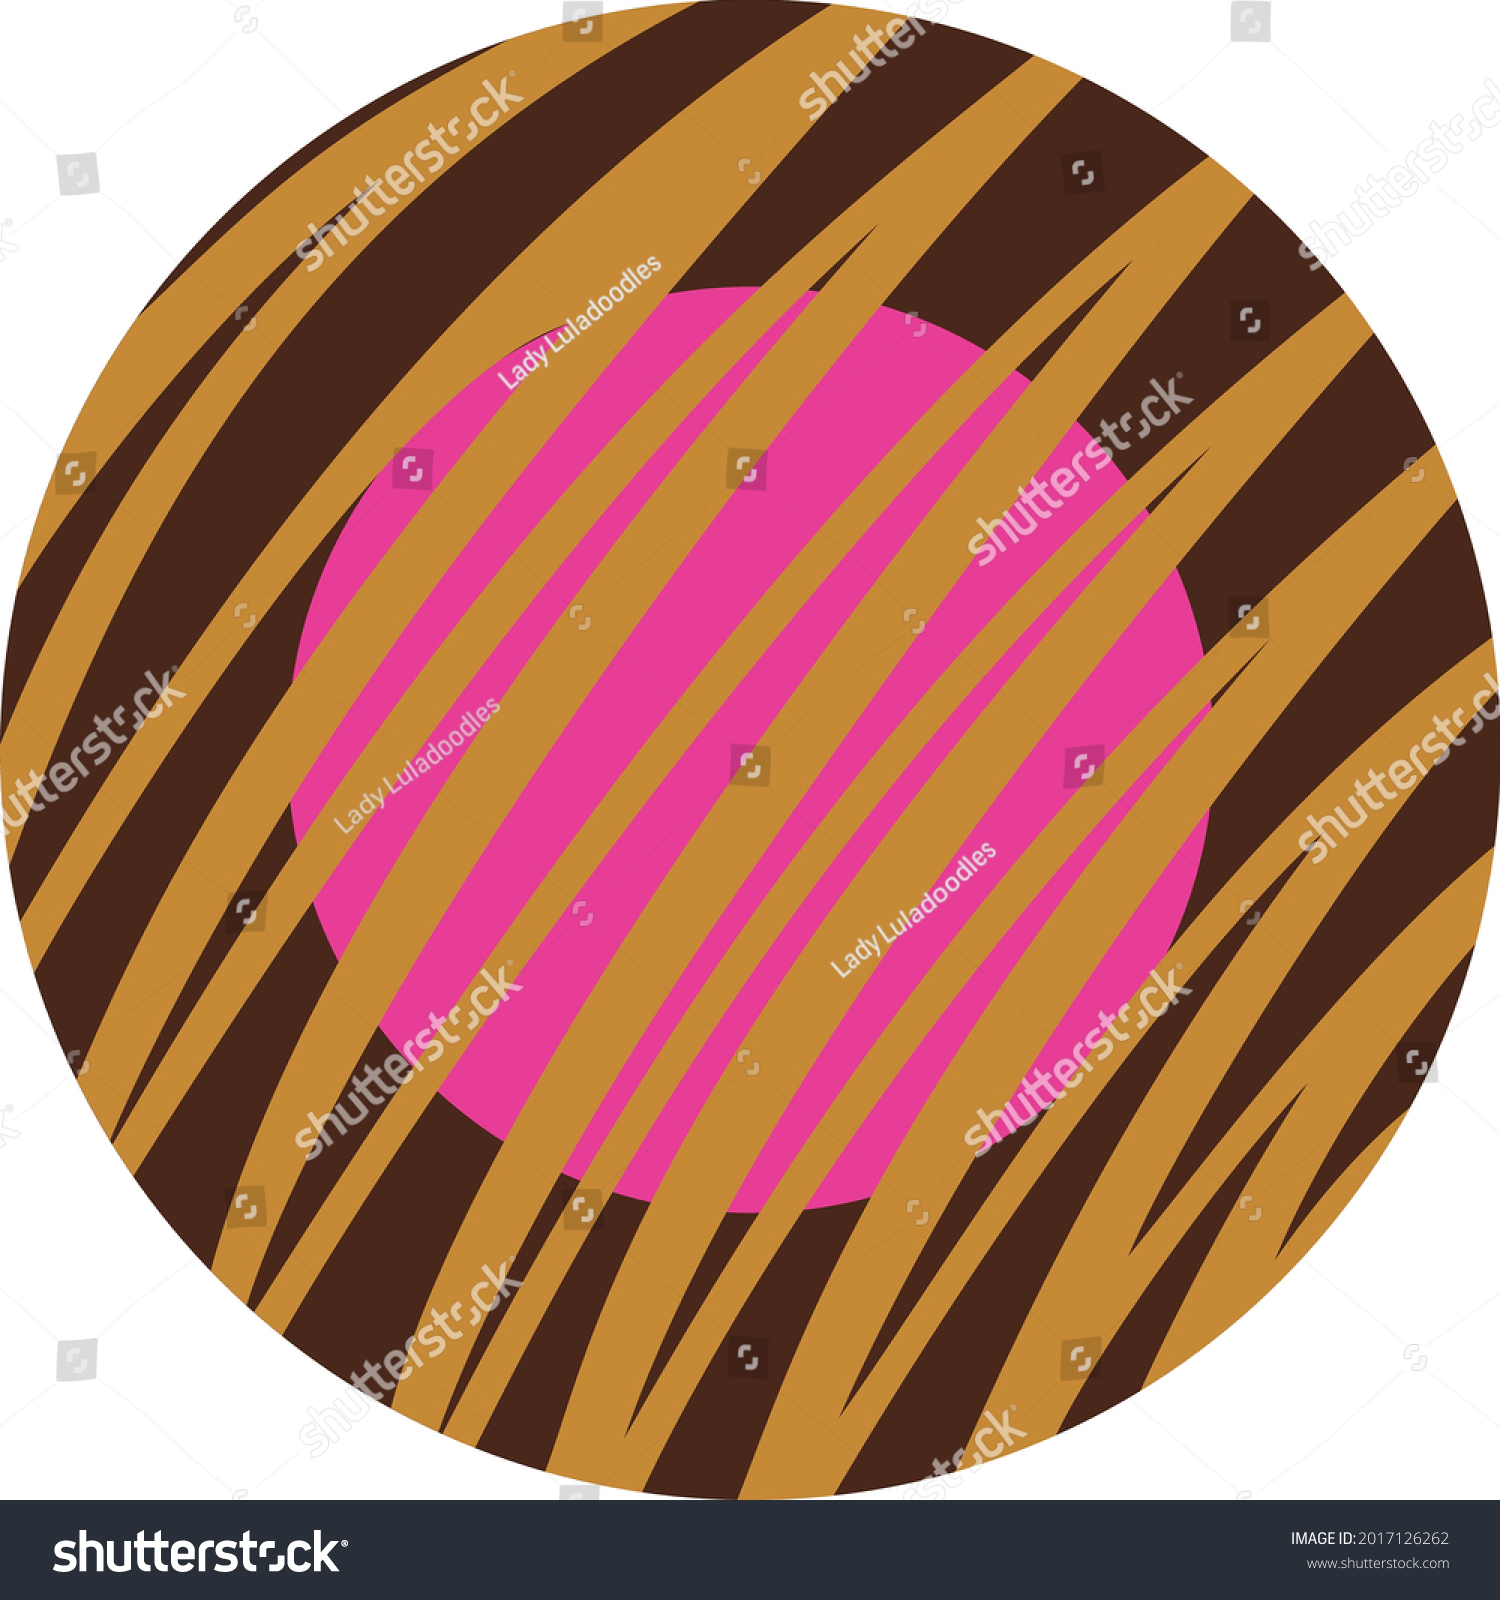 SVG of Round dark brown Chocolate candy with raspberry pink circular centre and caramel zigzag drizzle. Layered confectionary SVG svg